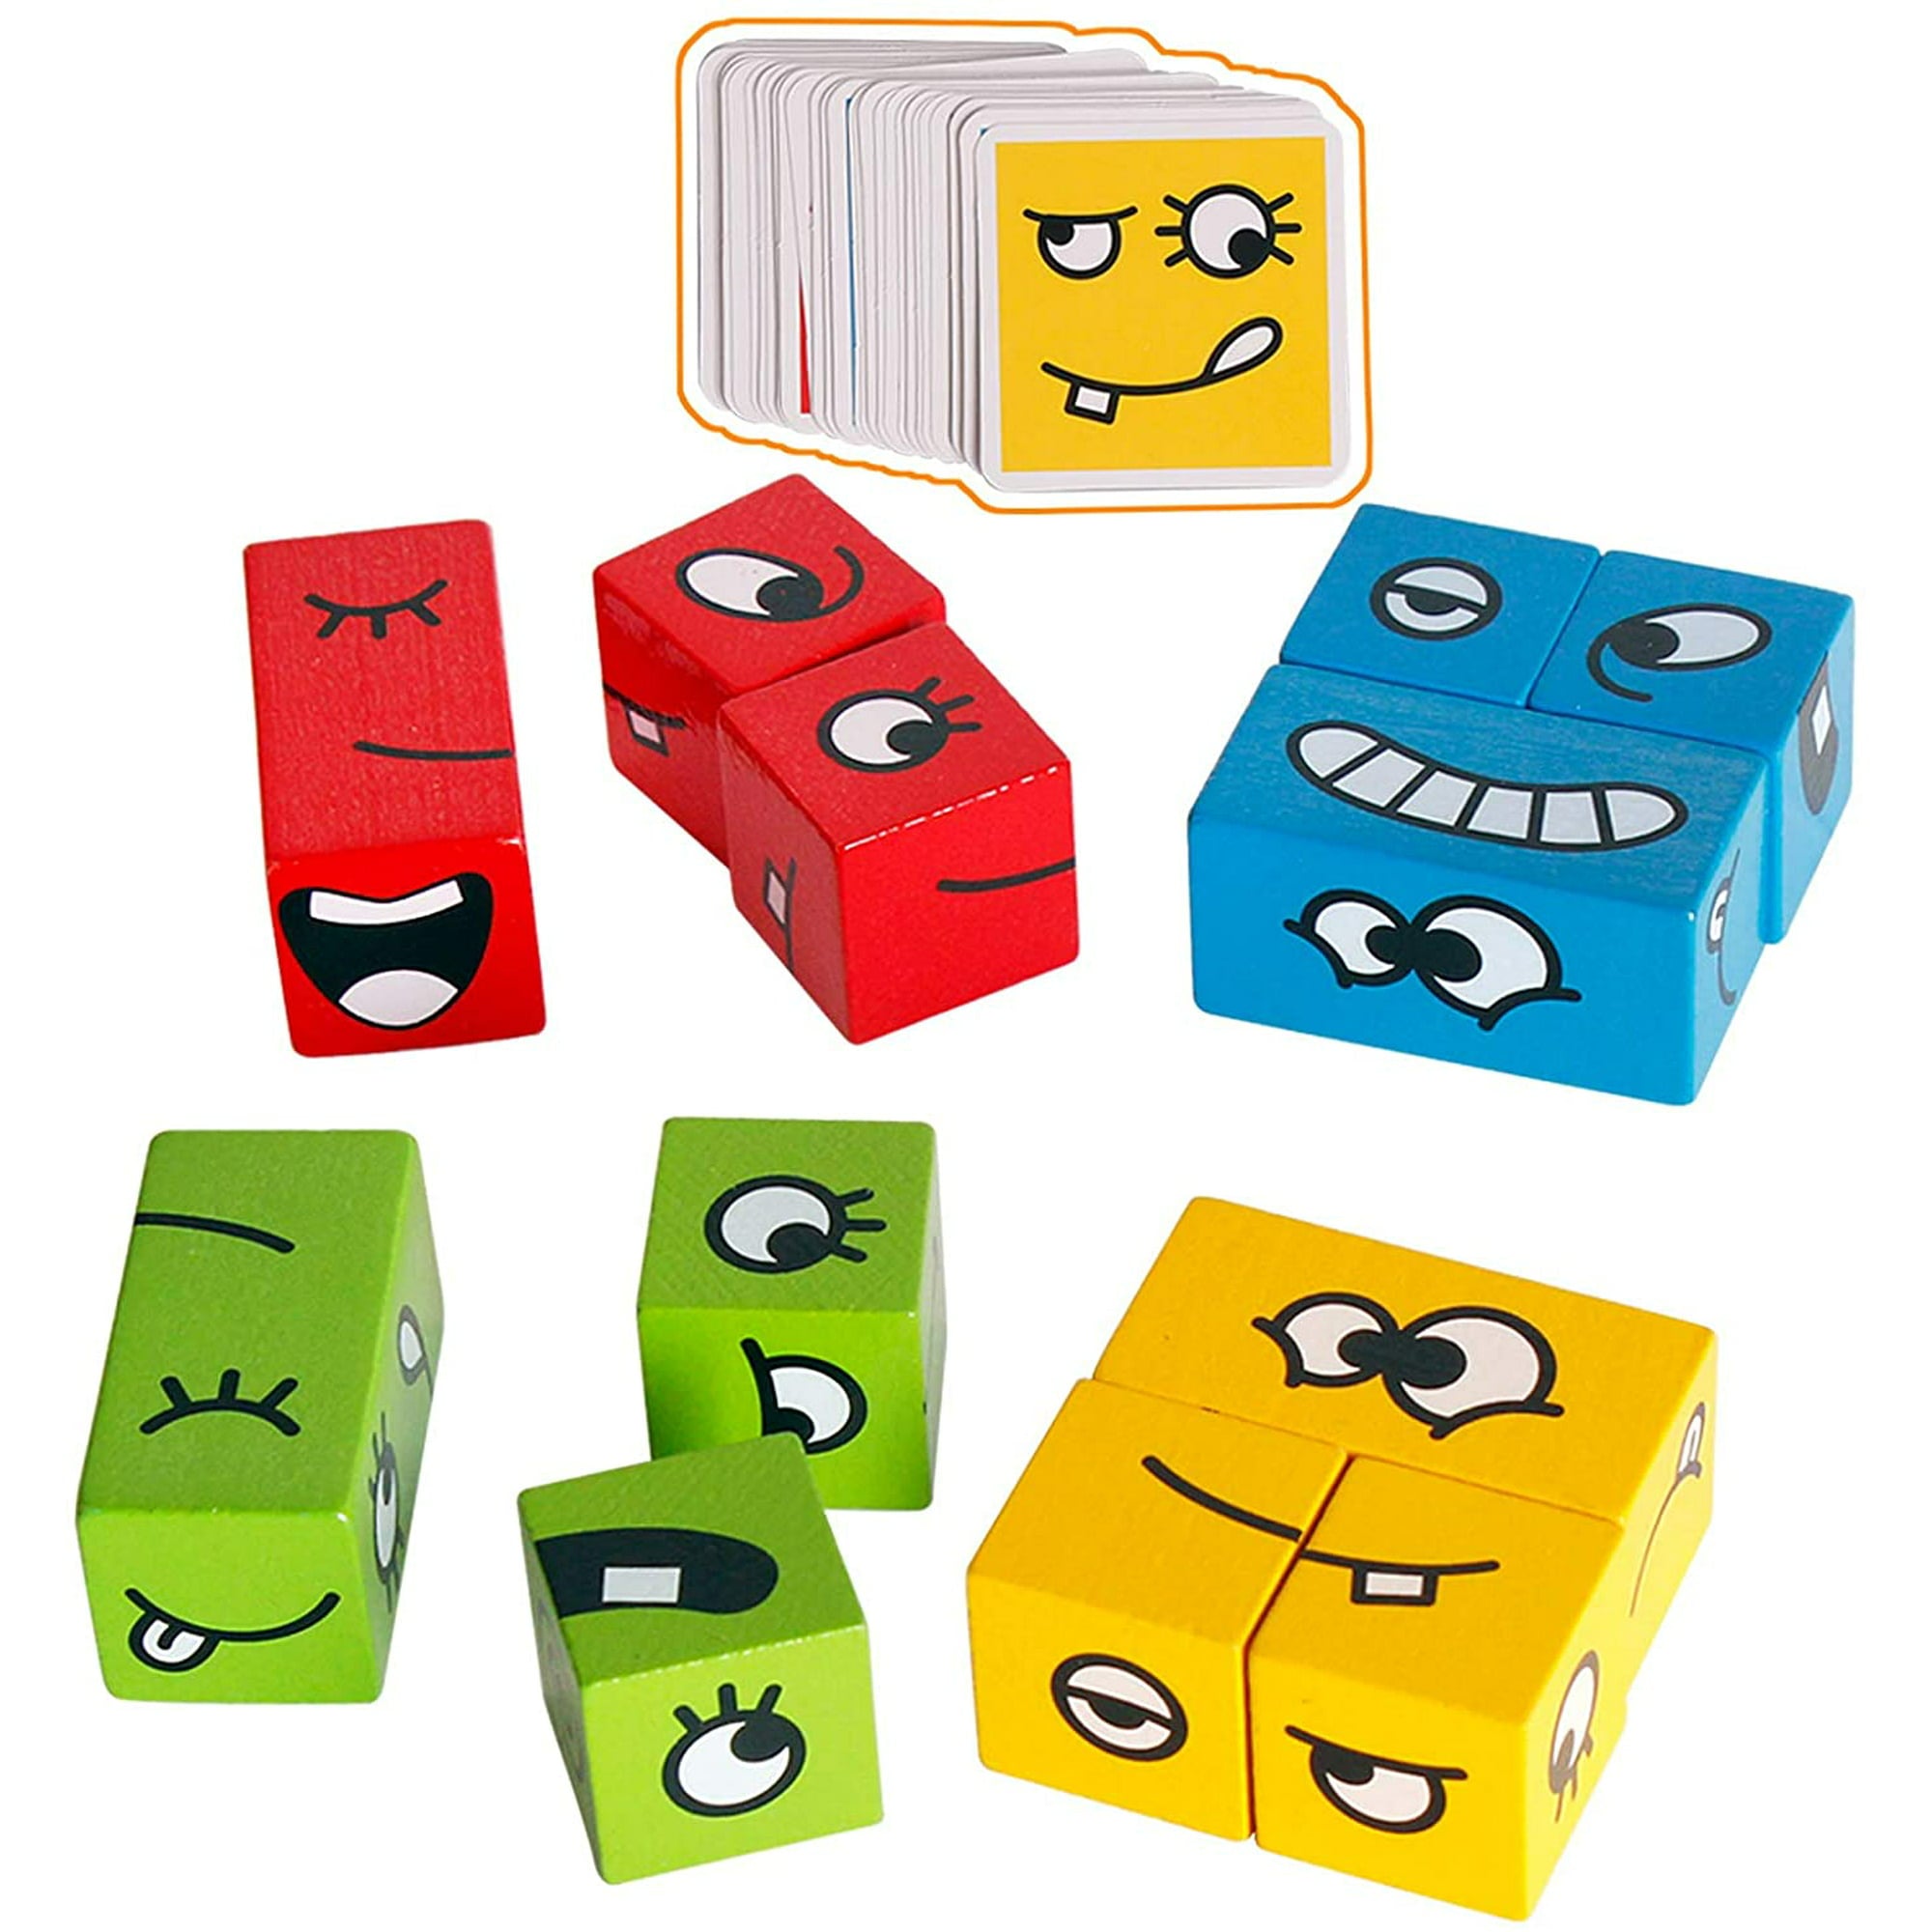 Face Changing Cube,Wooden Expressions Matching Block Puzzles Building Cubes Toy Board Games Educational Montessori Toys for Kids Ages 2 Years and Up